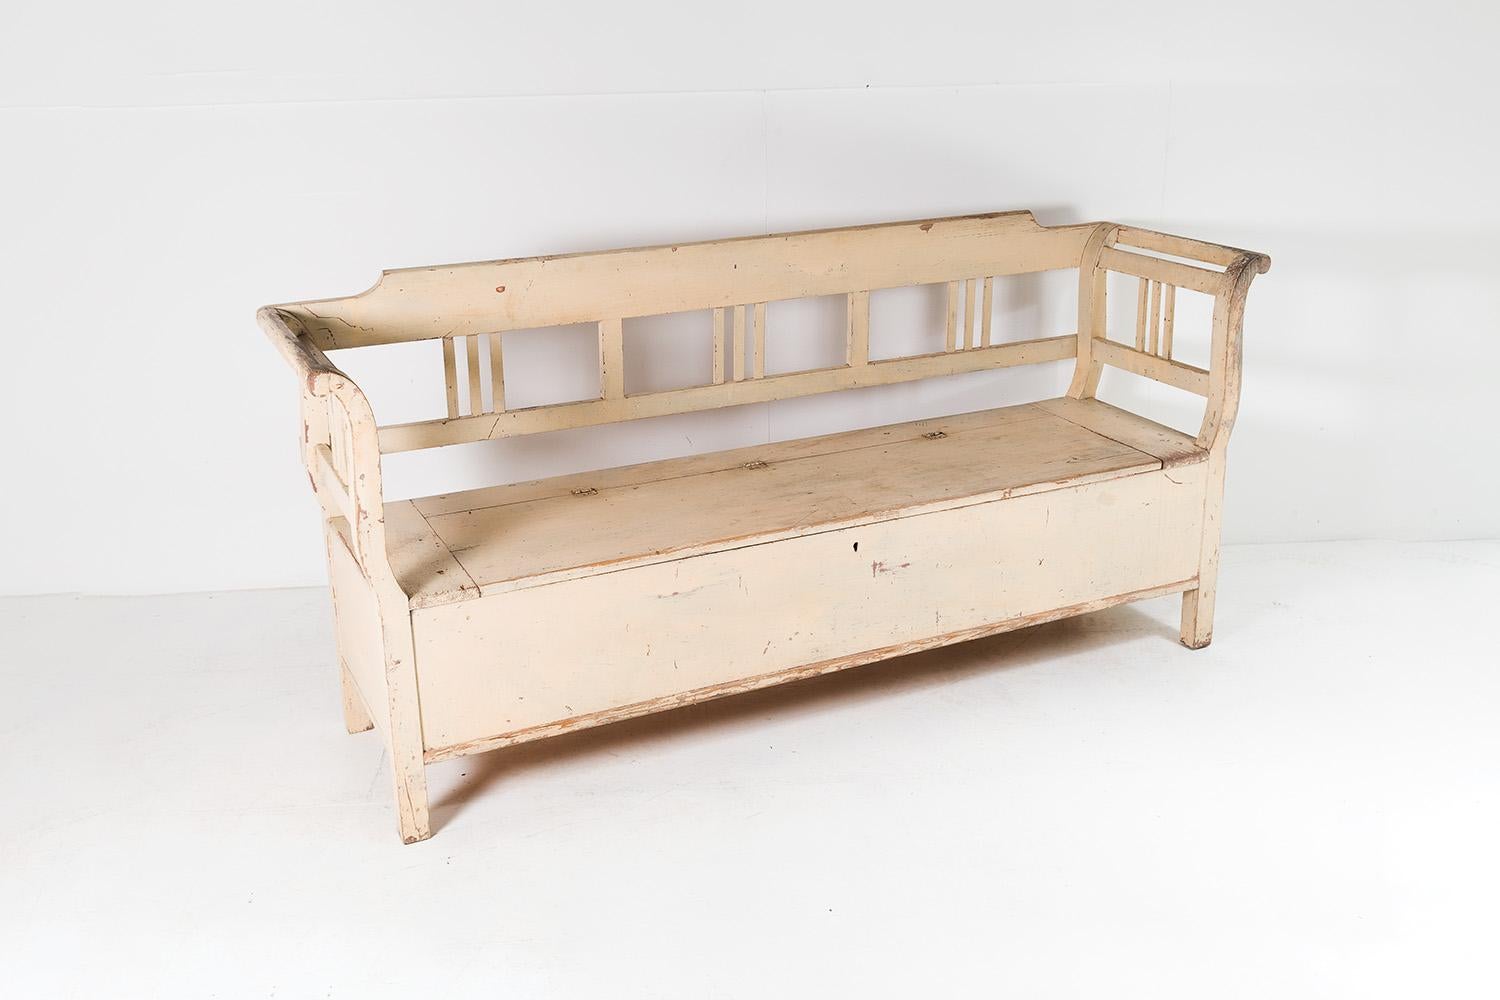 A lovely old European box settle in original cream paint. An early example made from solid pine, probably an old farmhouse or Shepherds bench with lift up lid for storage.
In it’s original rustic paint, it boasts a wonderful worn look with the old